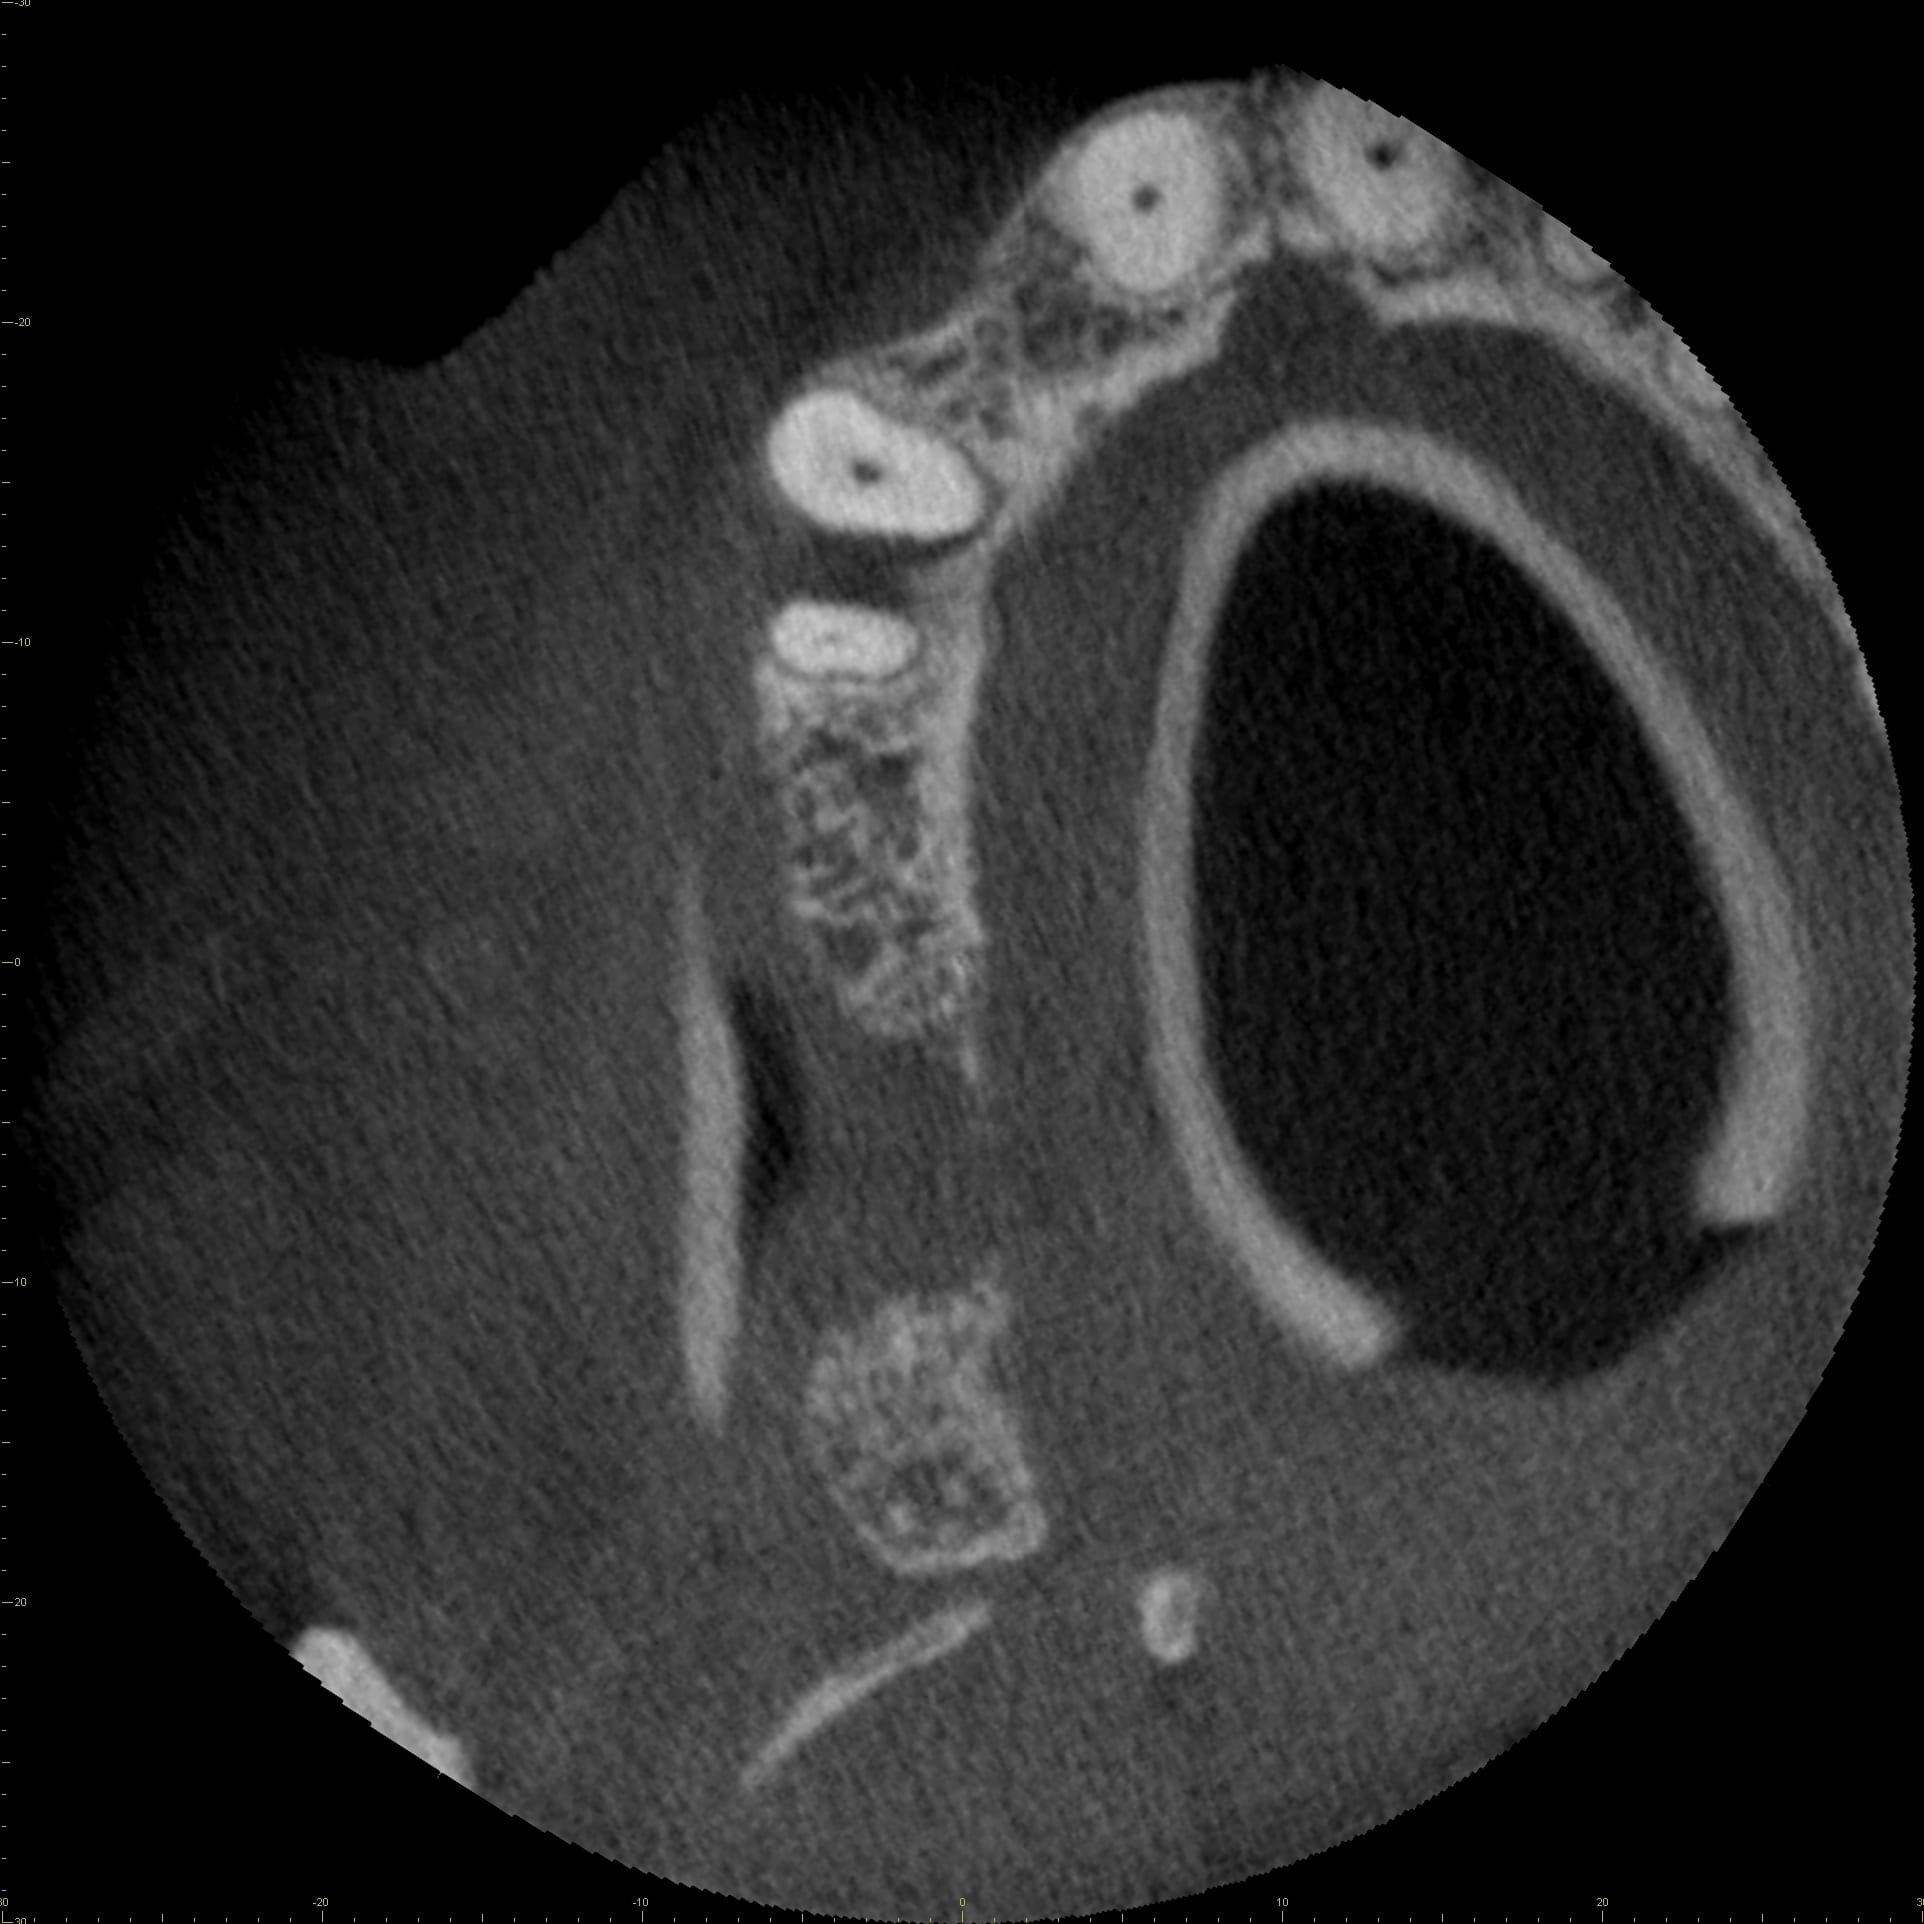 Figure 1E: Axial CBCT image, bone loss between canine and first premolar is visible